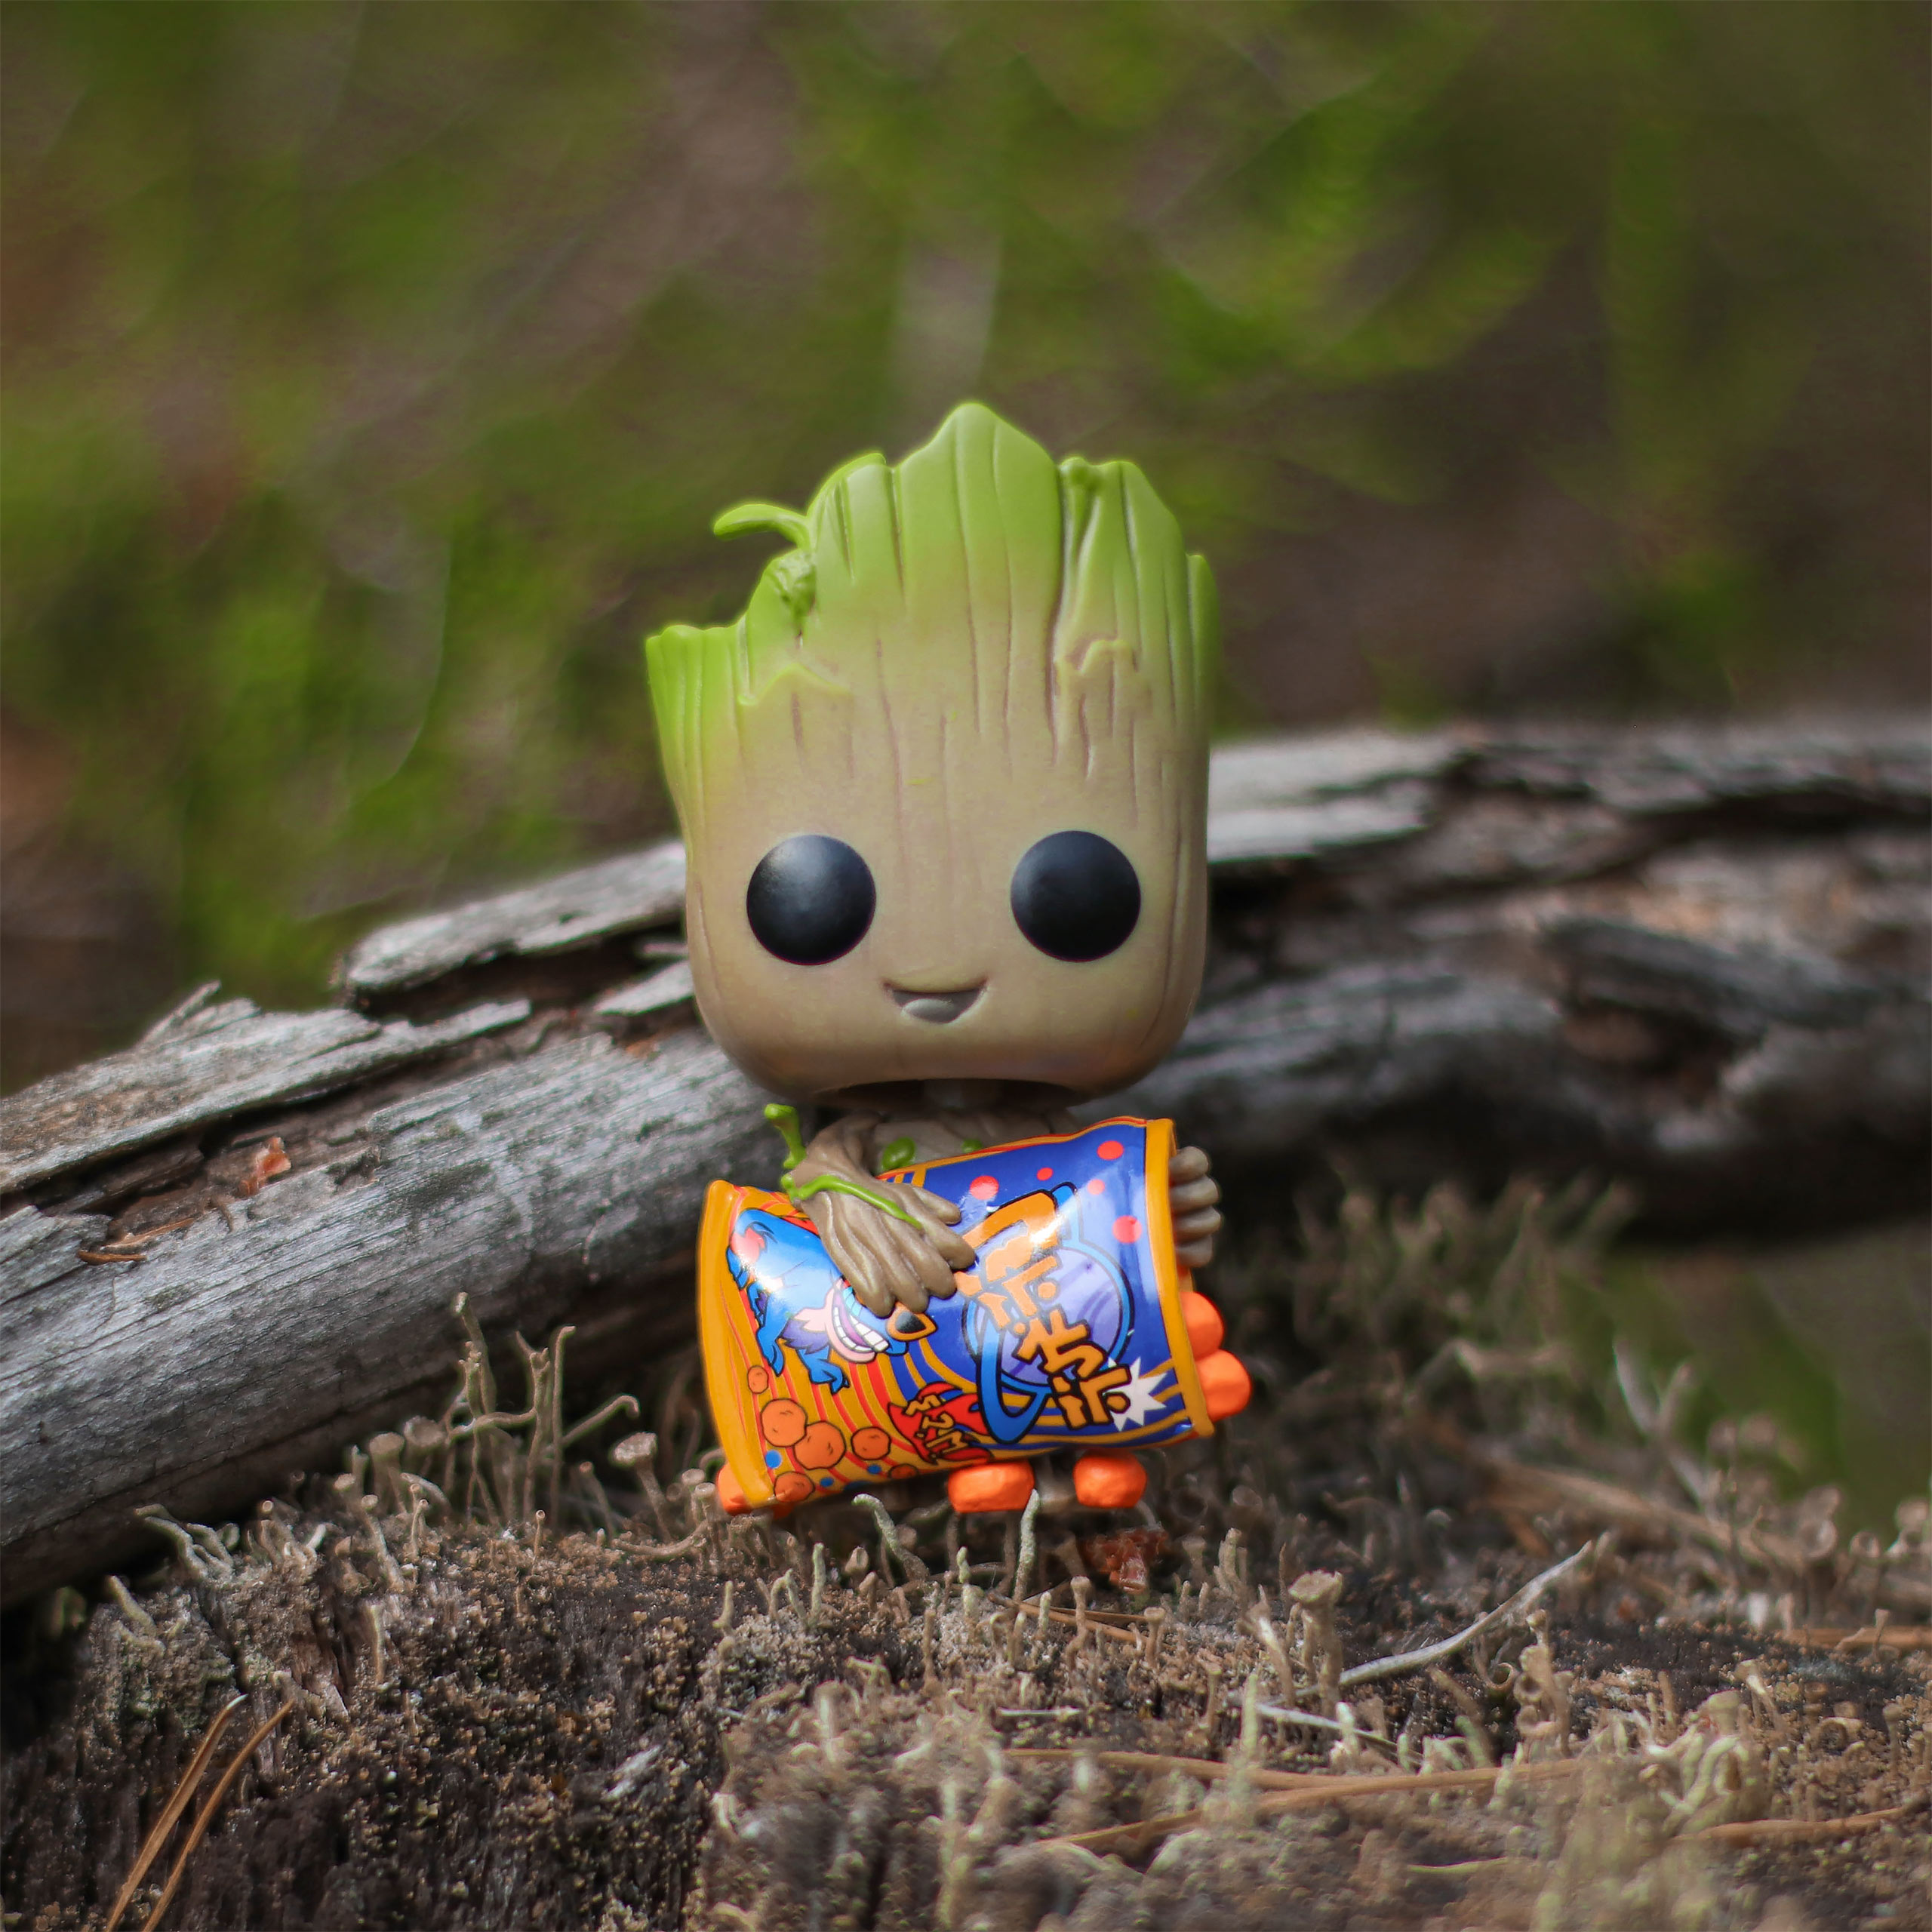 I Am Groot - Groot with cheese balls Funko Pop bobblehead figure